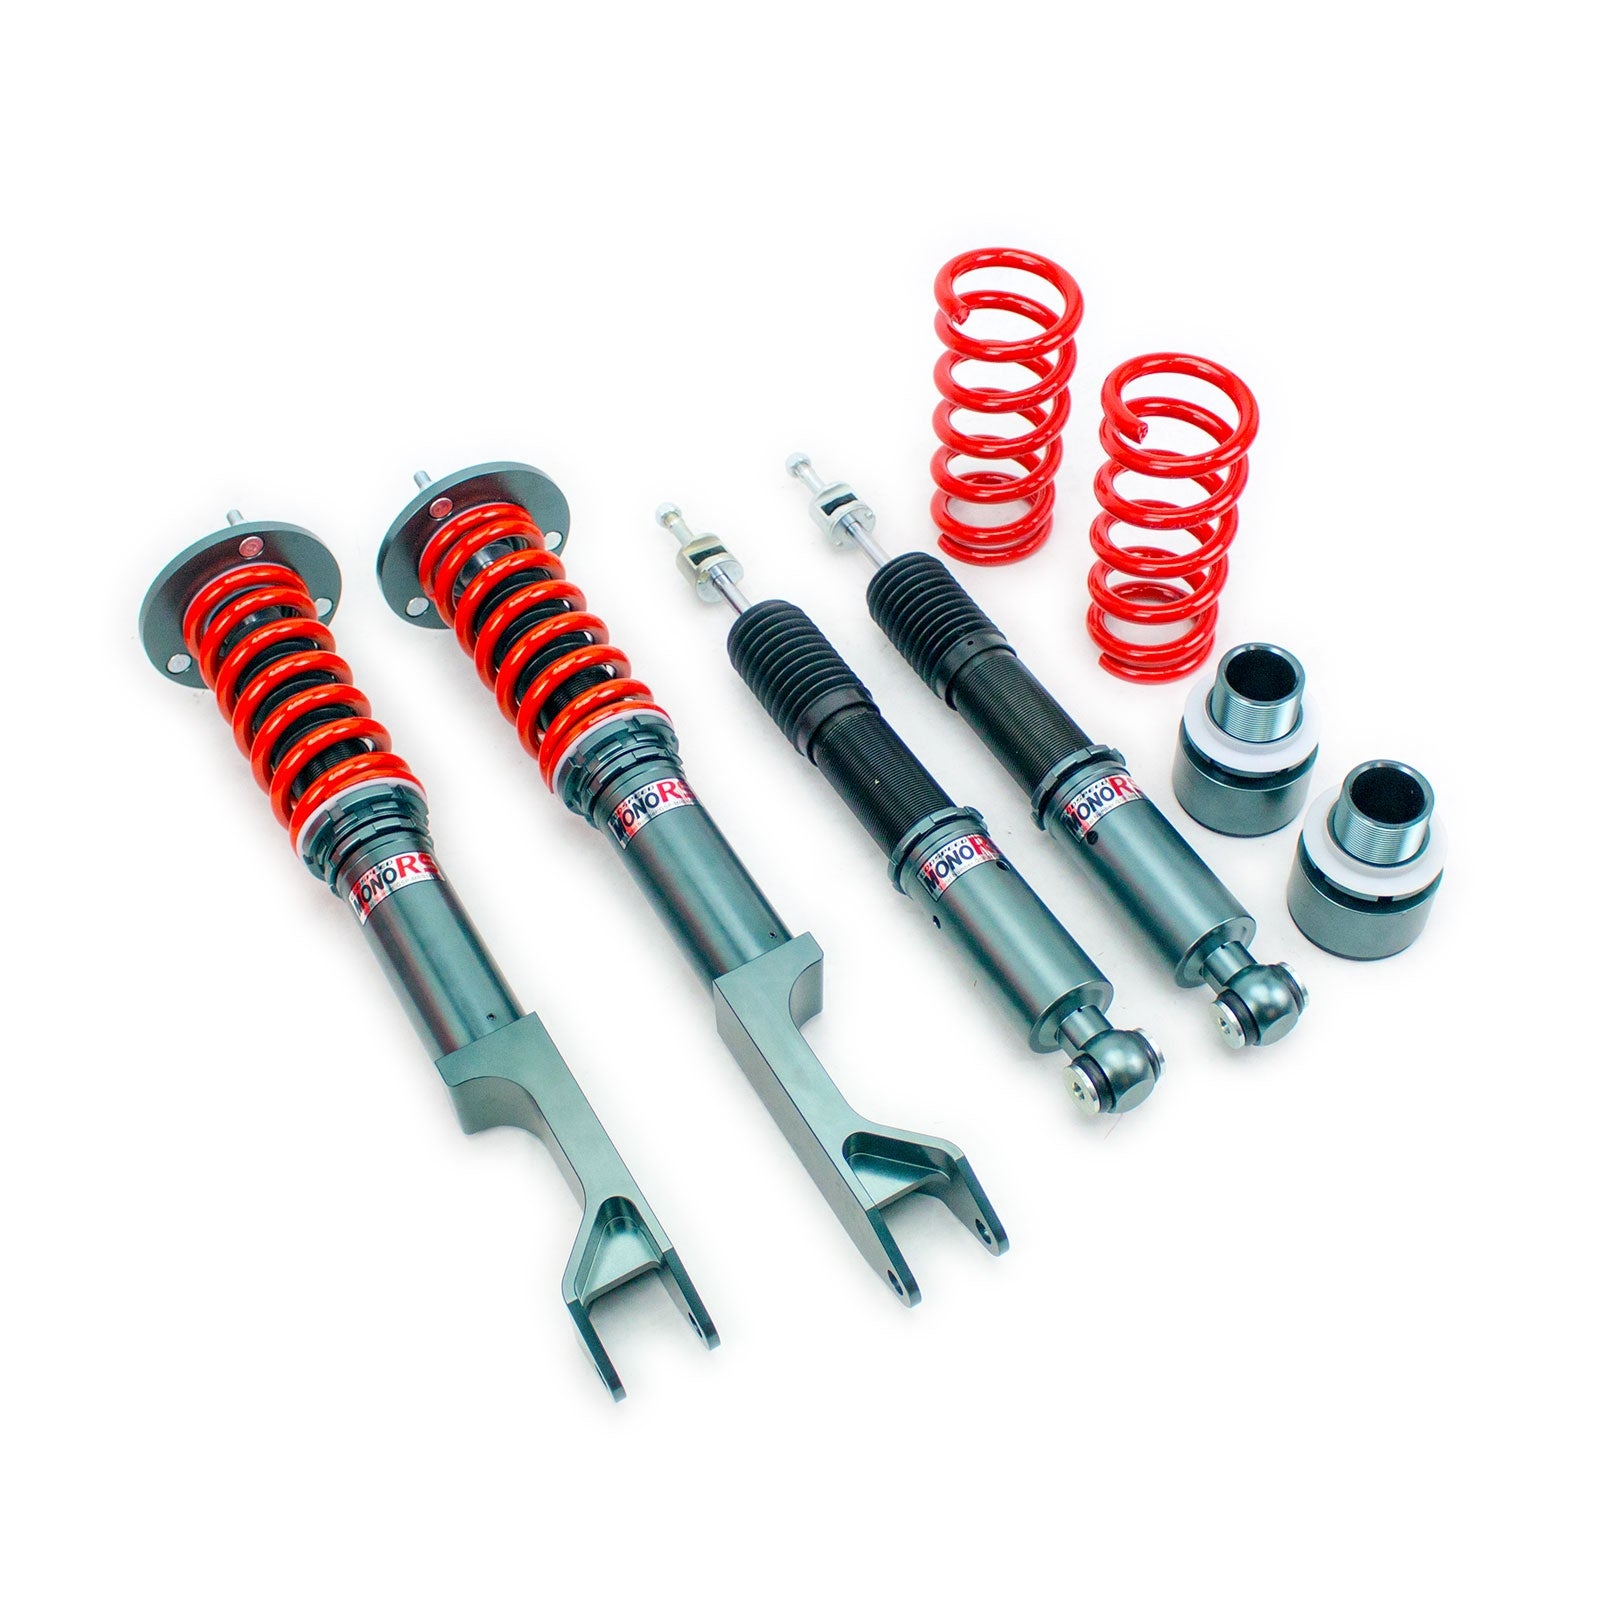 Godspeed MRS1414 MonoRS Coilover Lowering Kit, 32 Damping Adjustment, Ride Height Adjustable